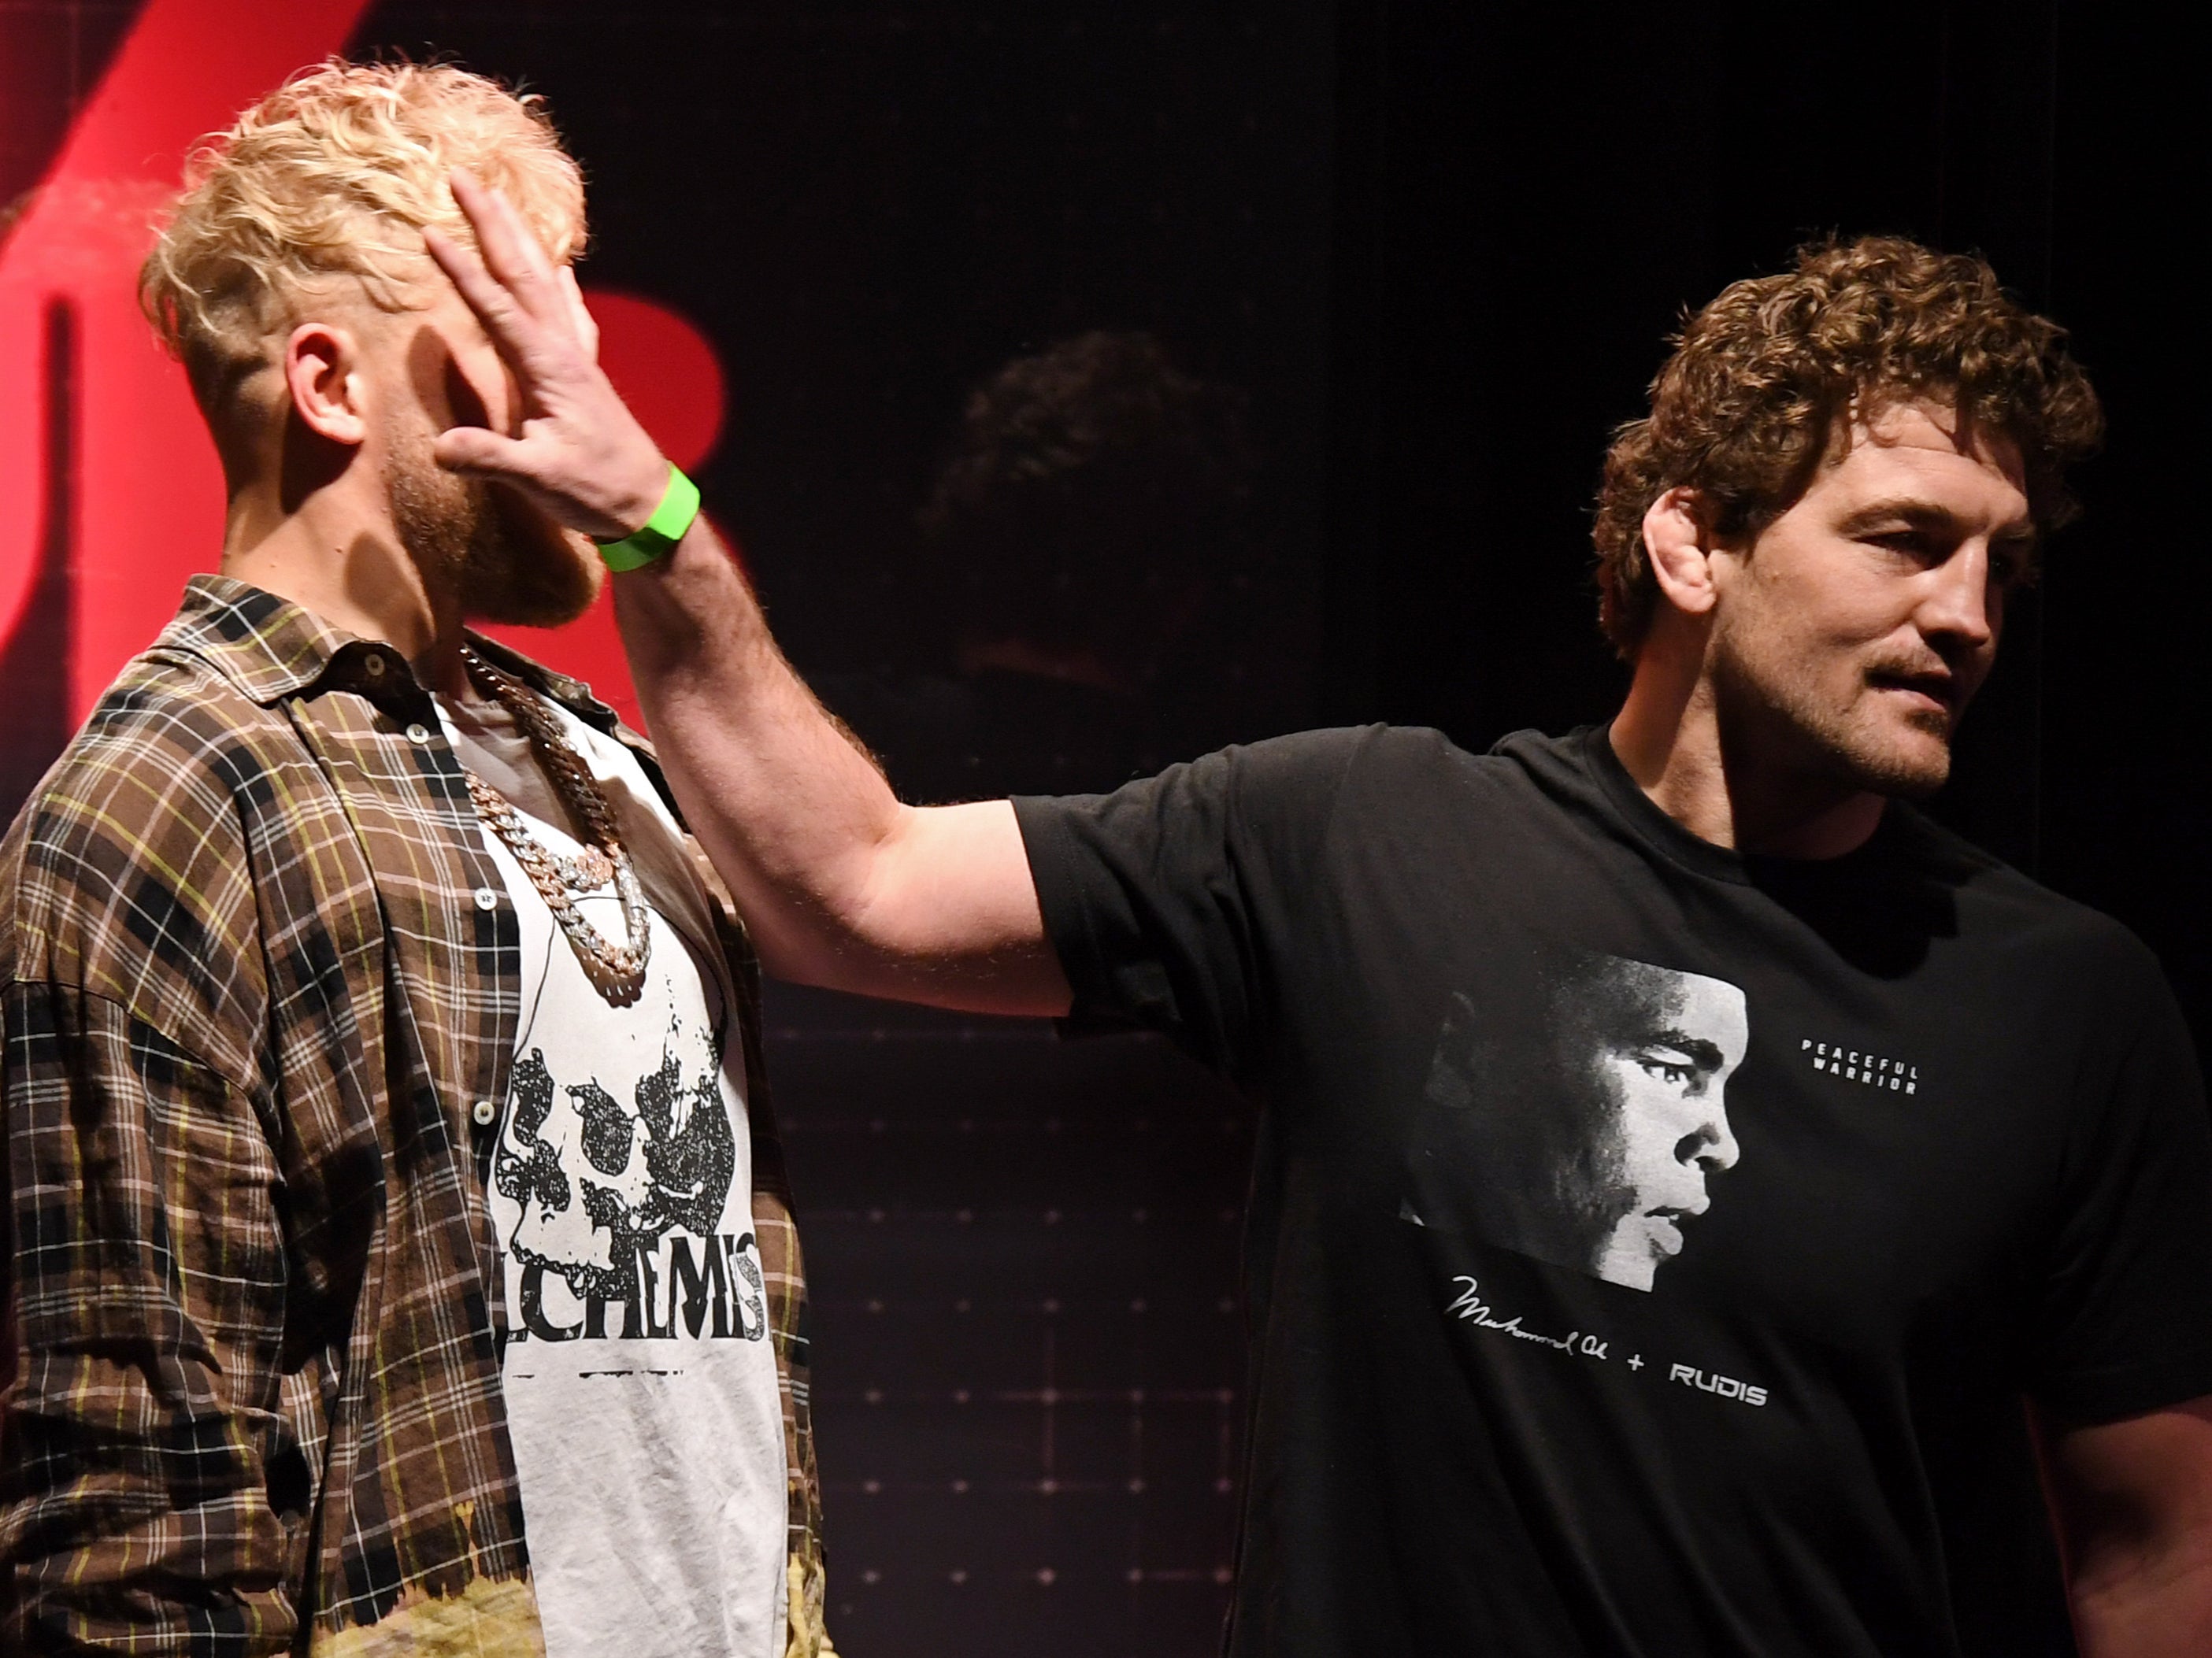 Ben Askren shoves Jake Paul as they face off during a news conference